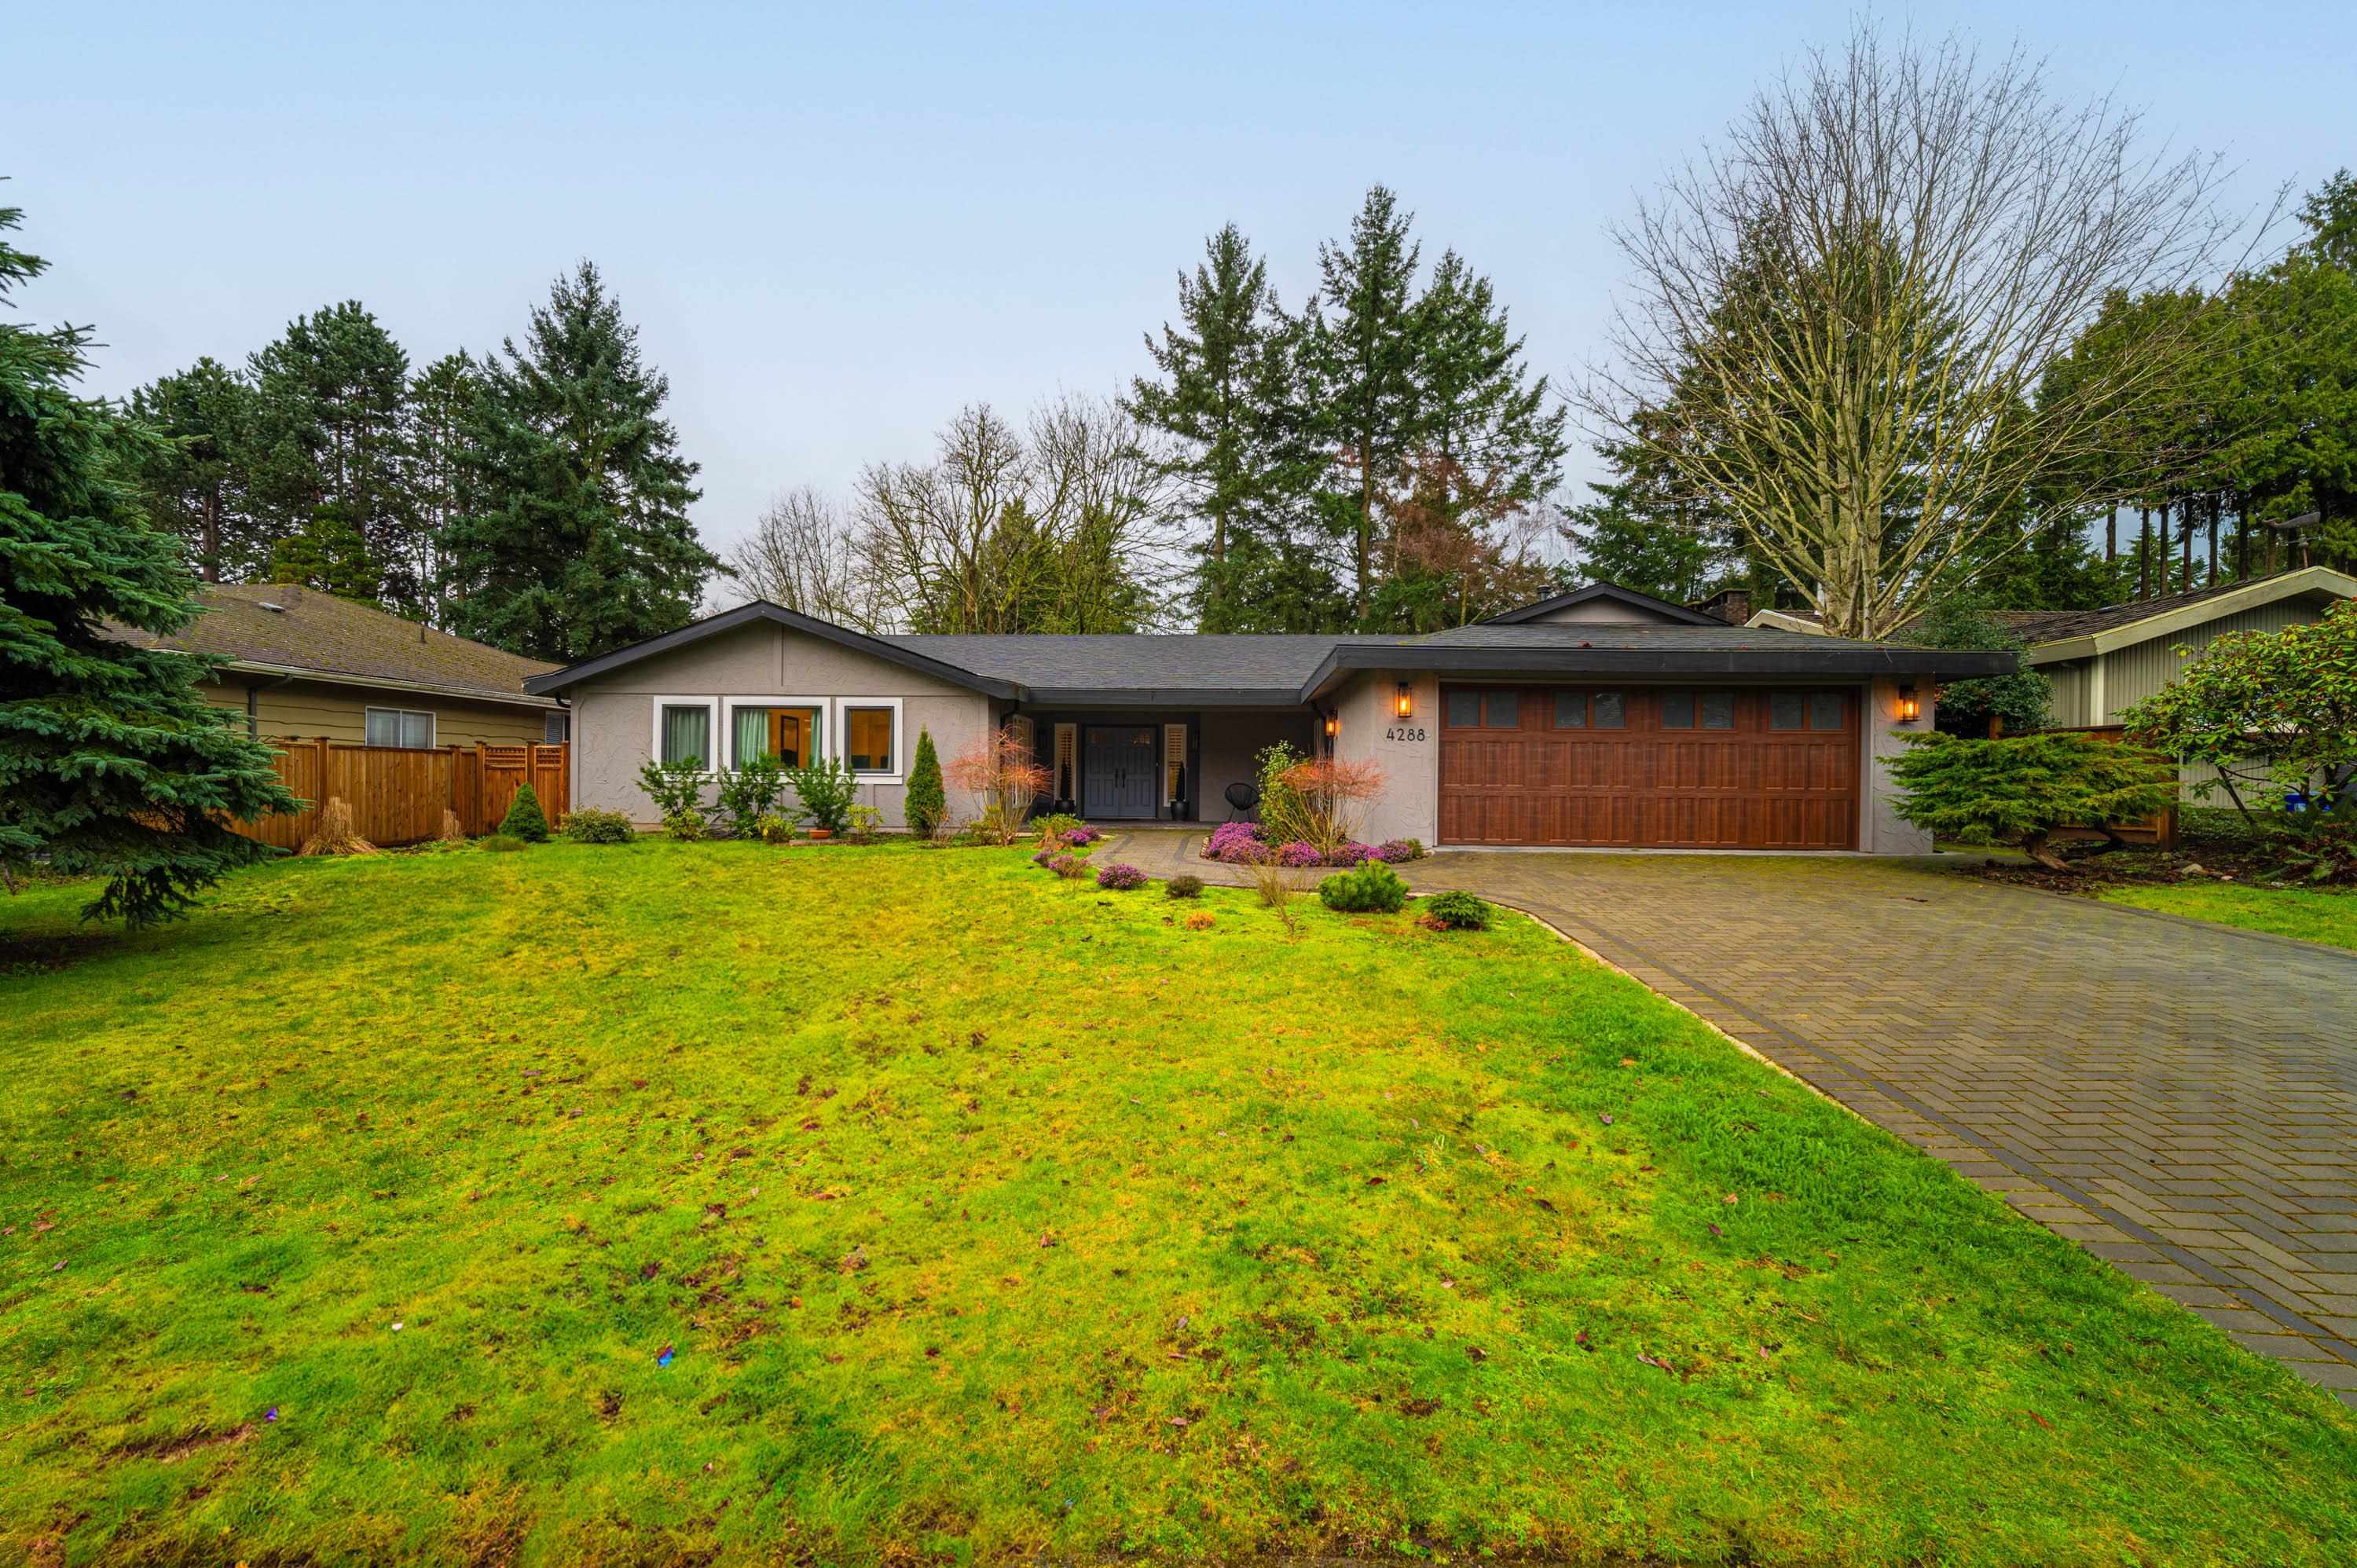 Listing image of 4288 MUSQUEAM DRIVE